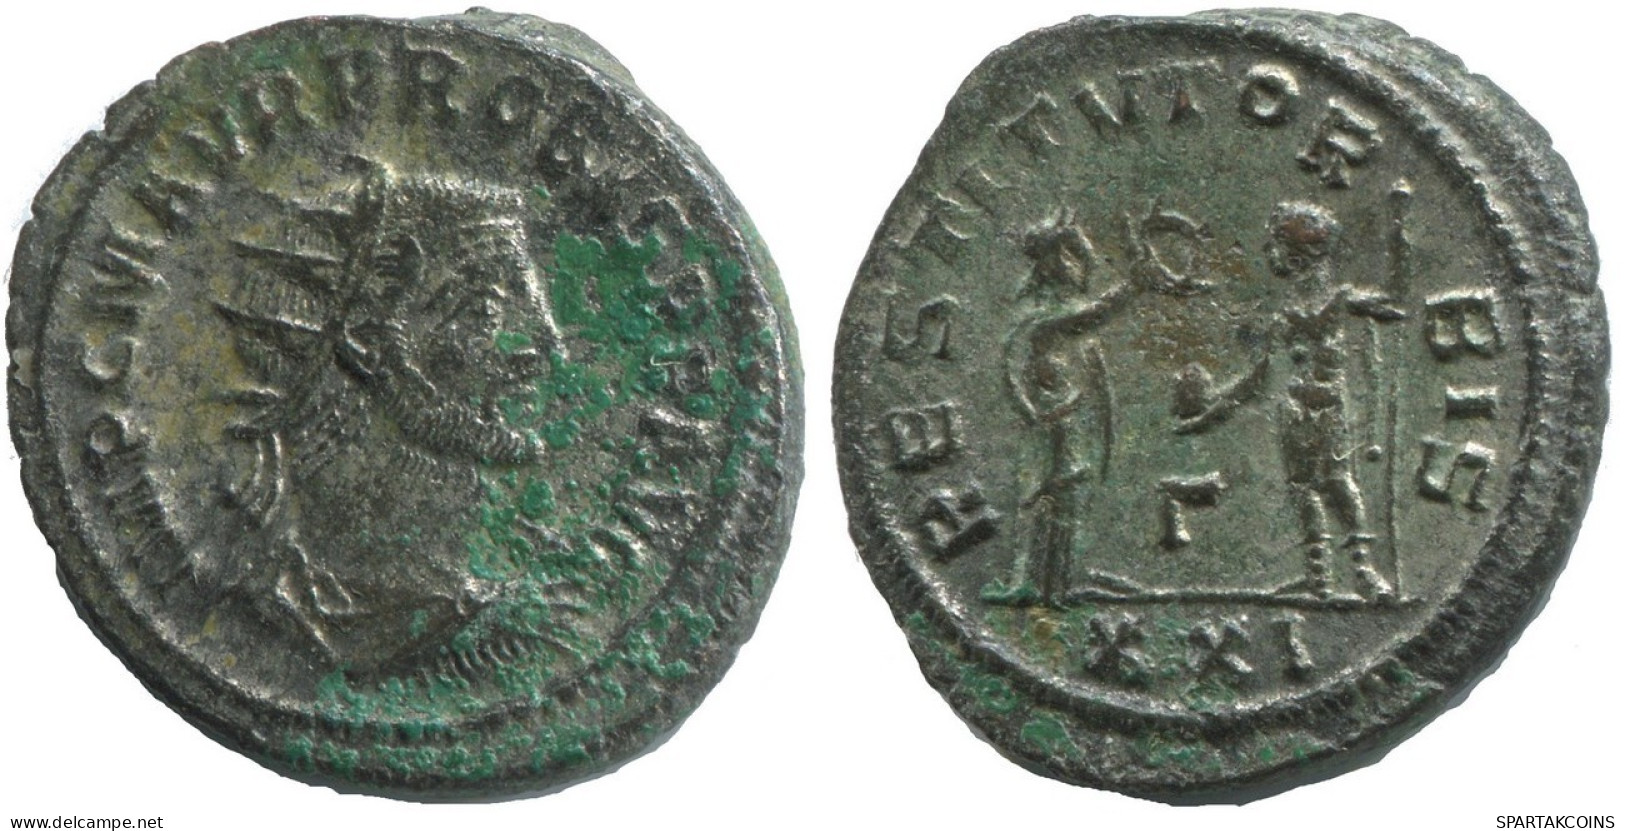 PROBUS ANTIOCH Г XXI AD276-282 SILVERED LATE ROMAN Moneda 4.3g/23mm #ANT2693.41.E.A - The Military Crisis (235 AD Tot 284 AD)